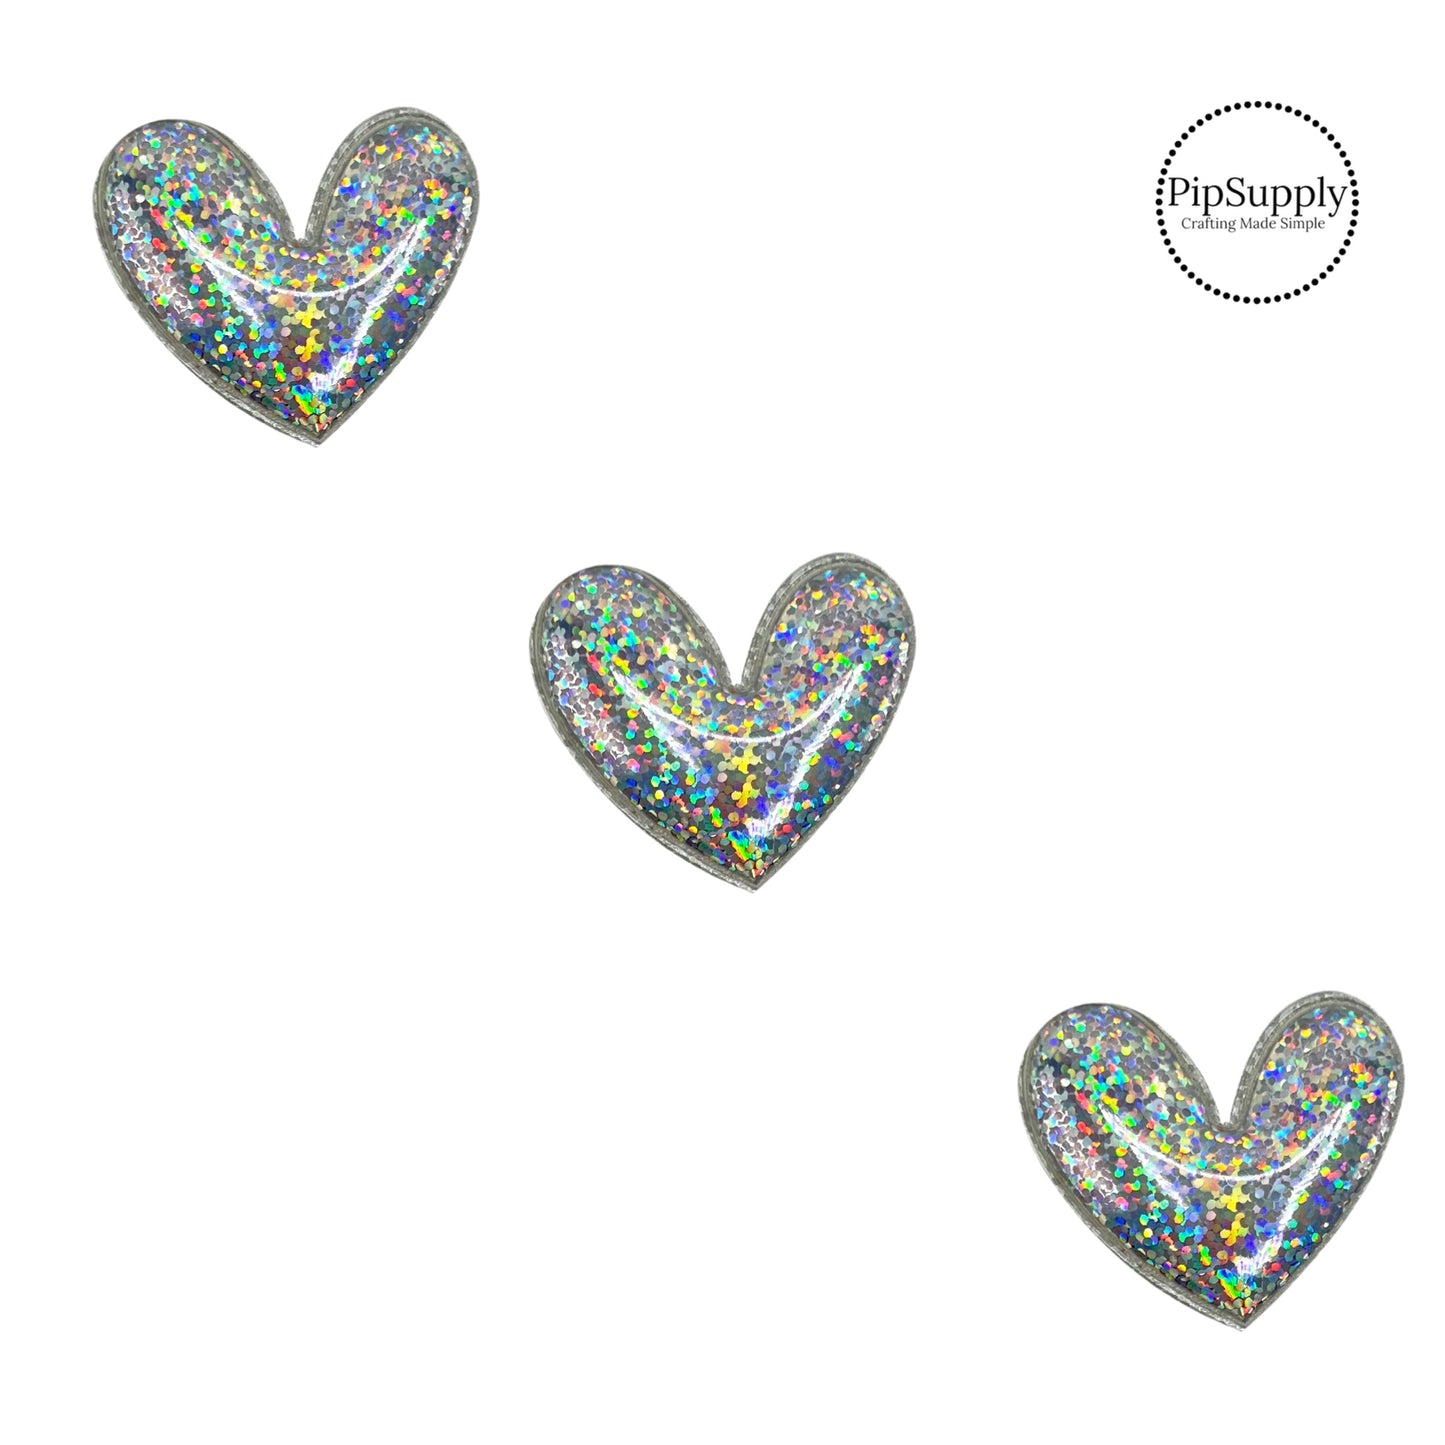 holographic heart craft embellishment with a fabric backing and is about 2 inches wide